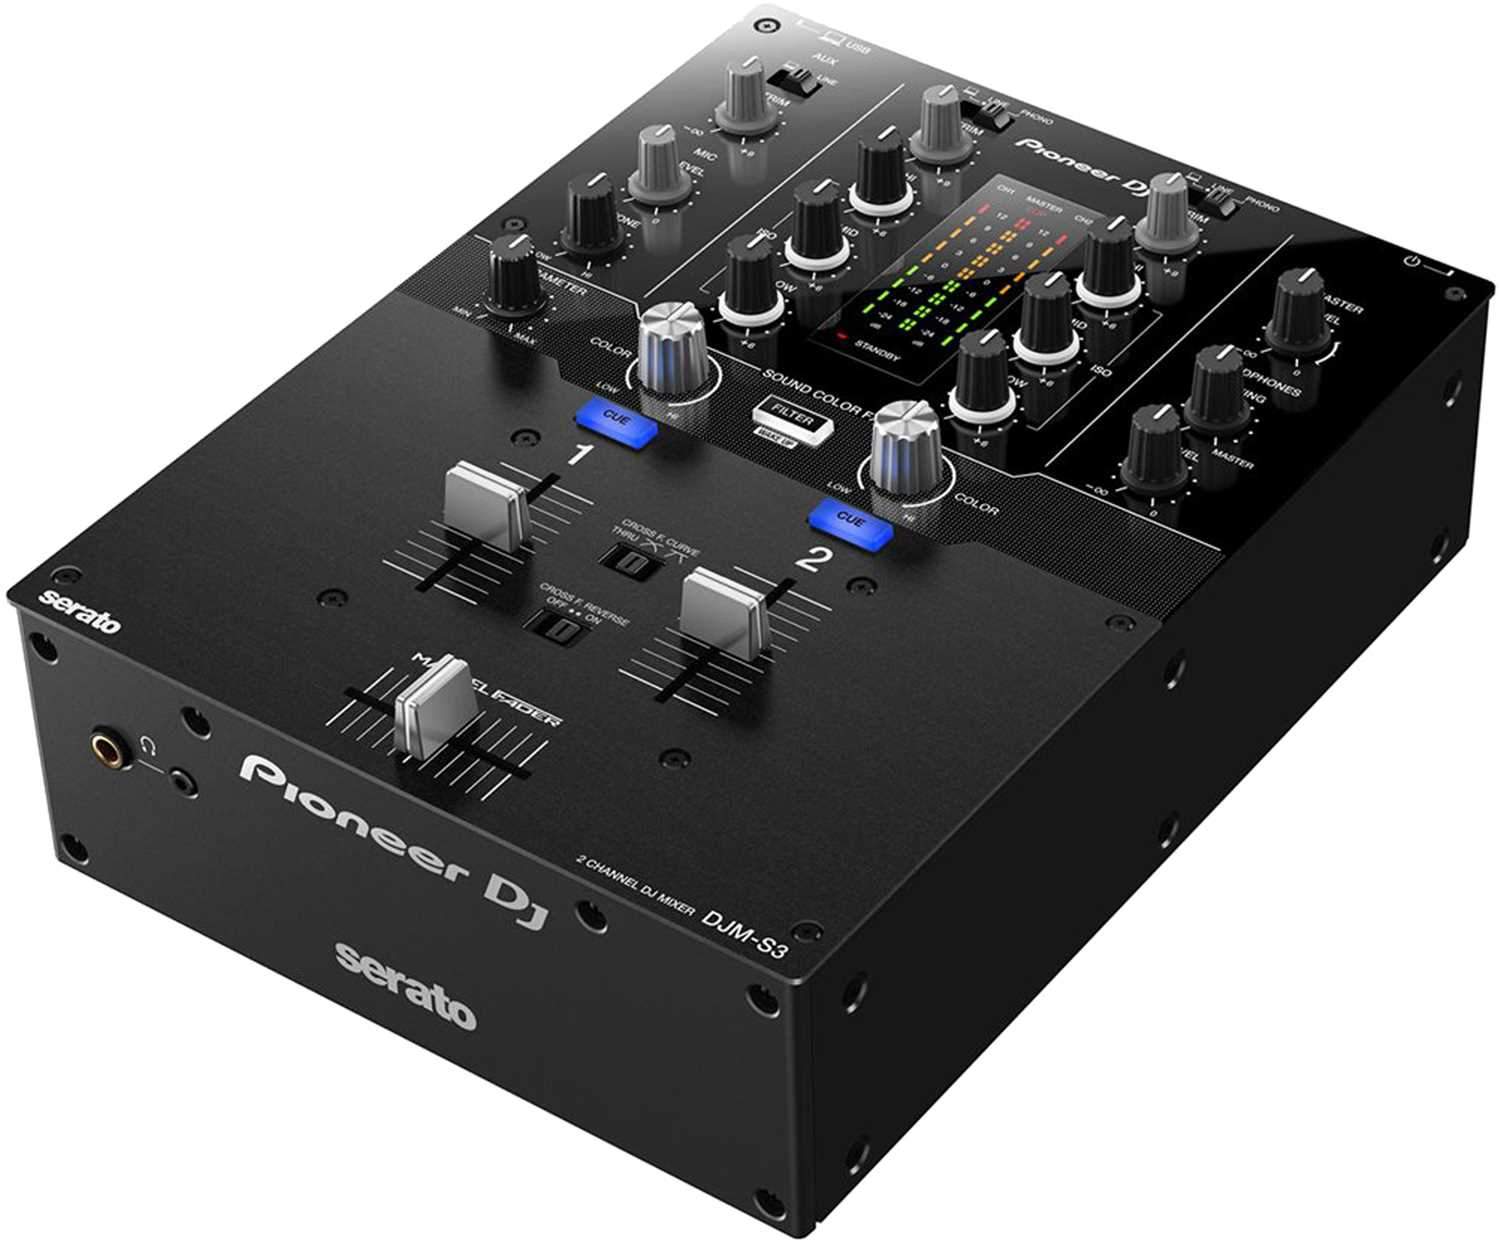 Pioneer DJM-S3 2-Channel DJ Mixer with Decksaver Cover - ProSound and Stage Lighting